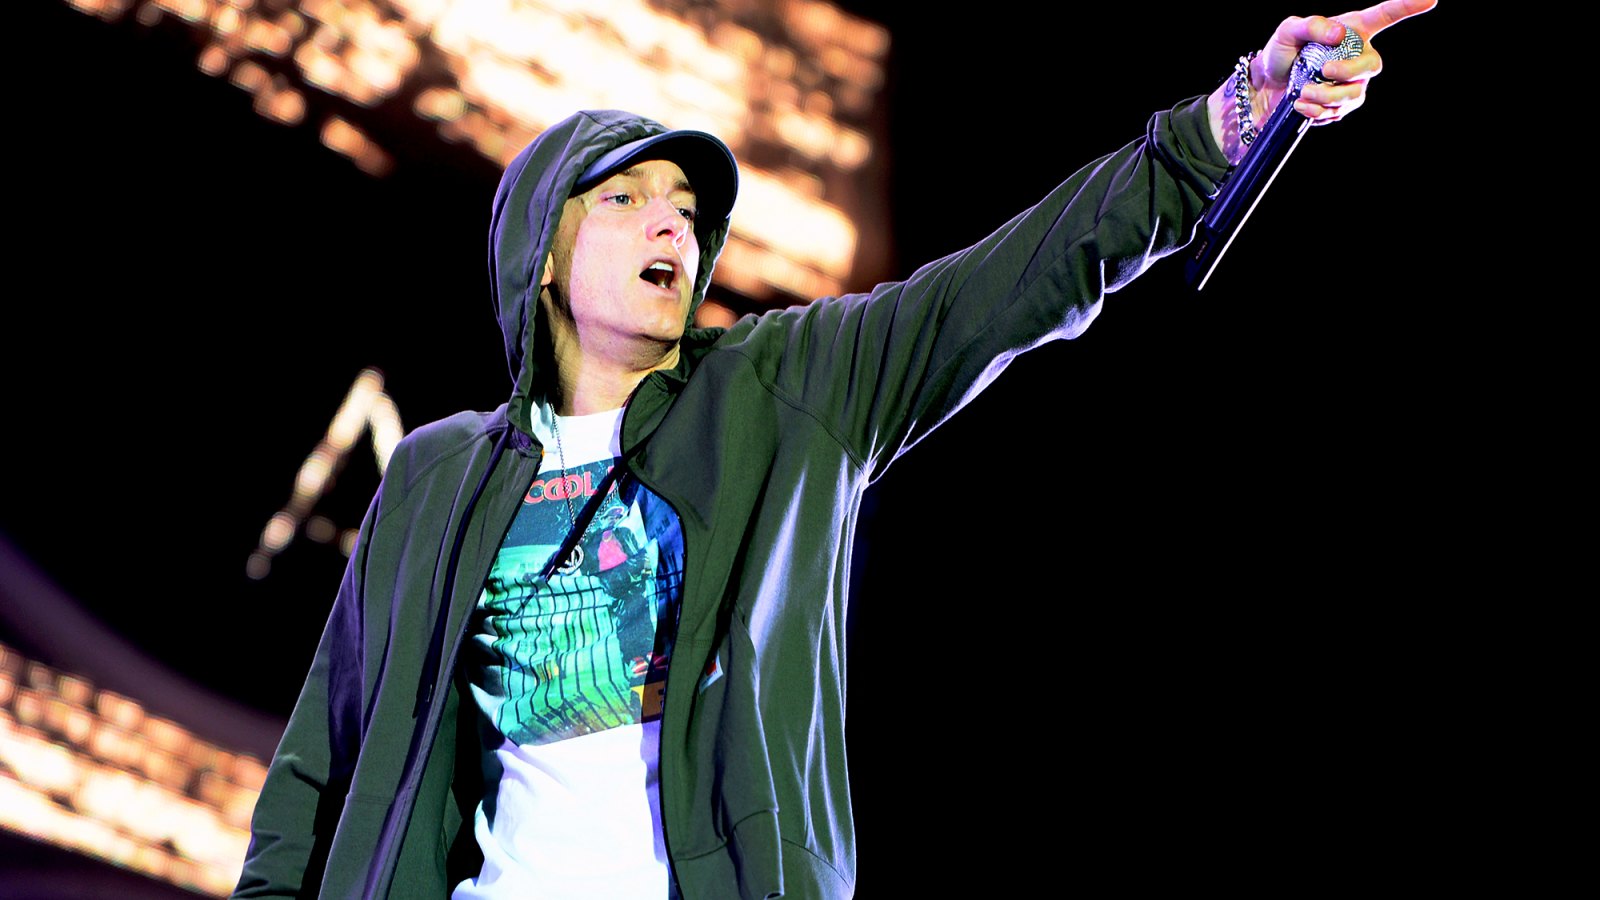 Eminem performs at Samsung Galaxy stage during 2014 Lollapalooza Day One at Grant Park in Chicago, Illinois.